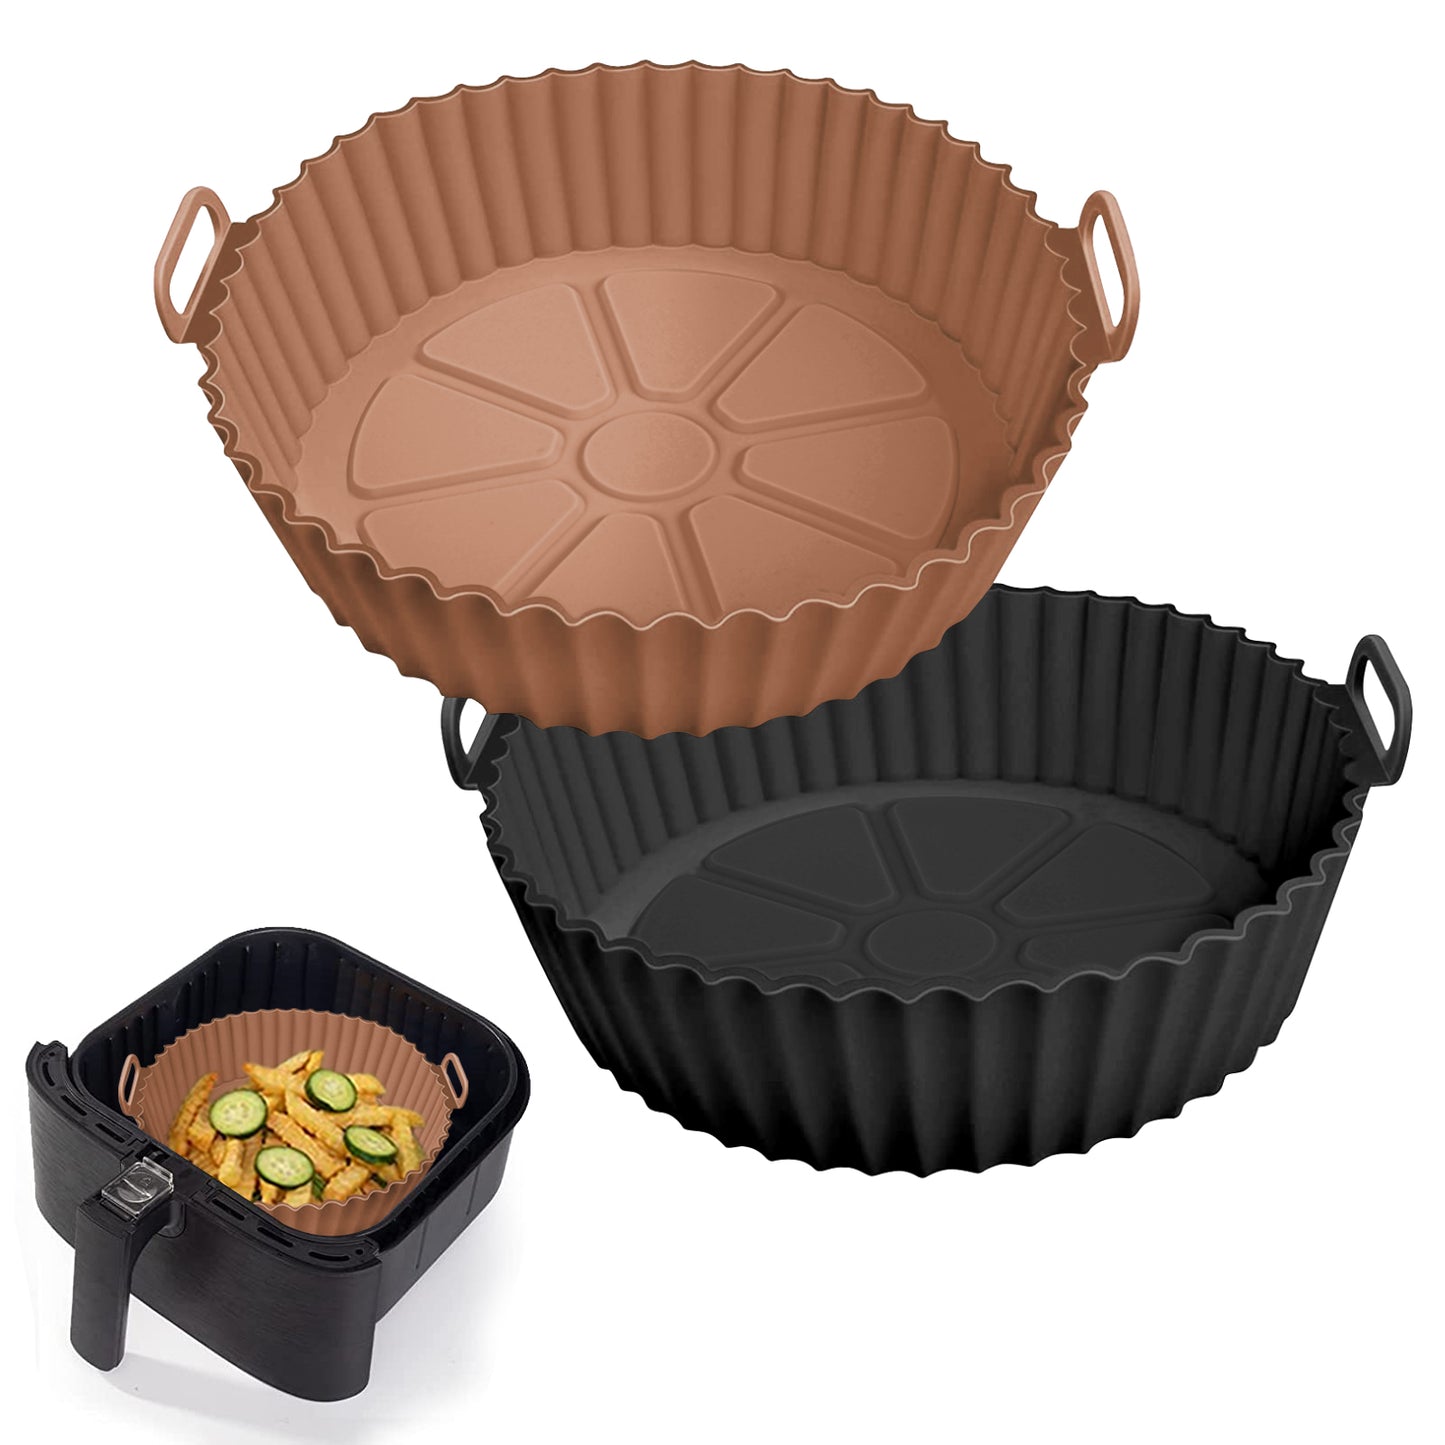 The Best Air Fry Accessory? A Cake Pan.